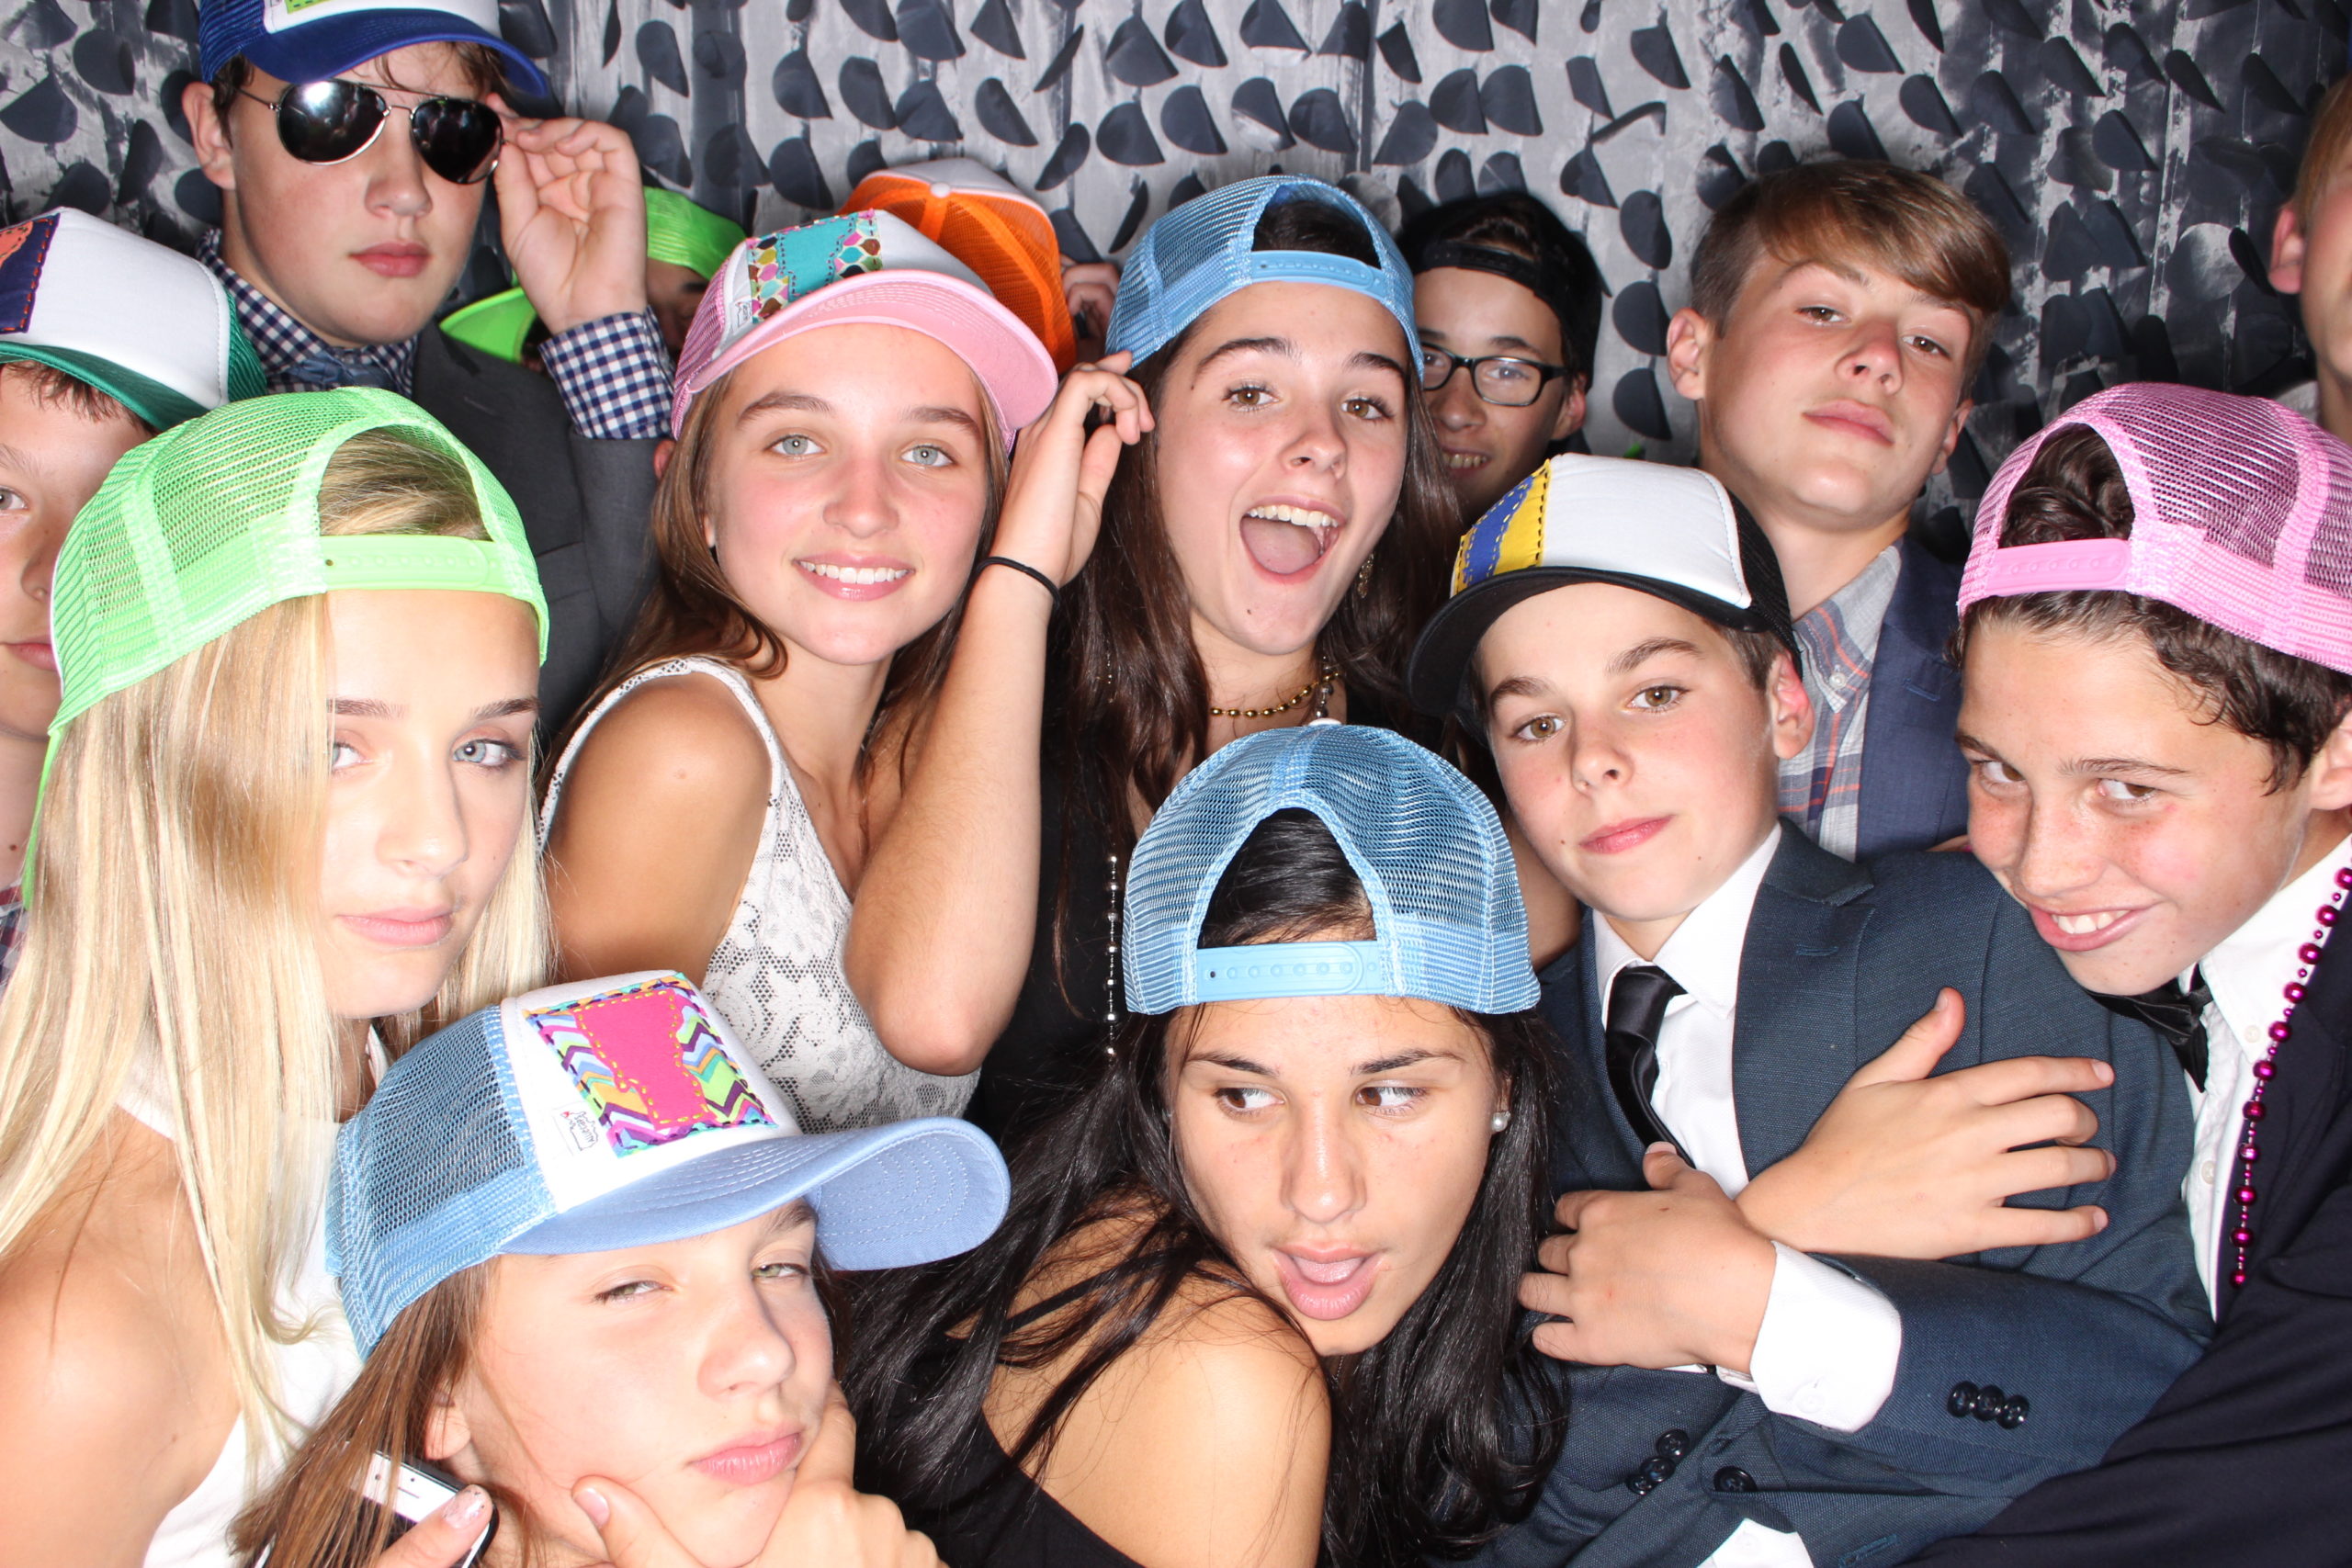 Group photo of teenagers posing with snap back hats in a photo booth